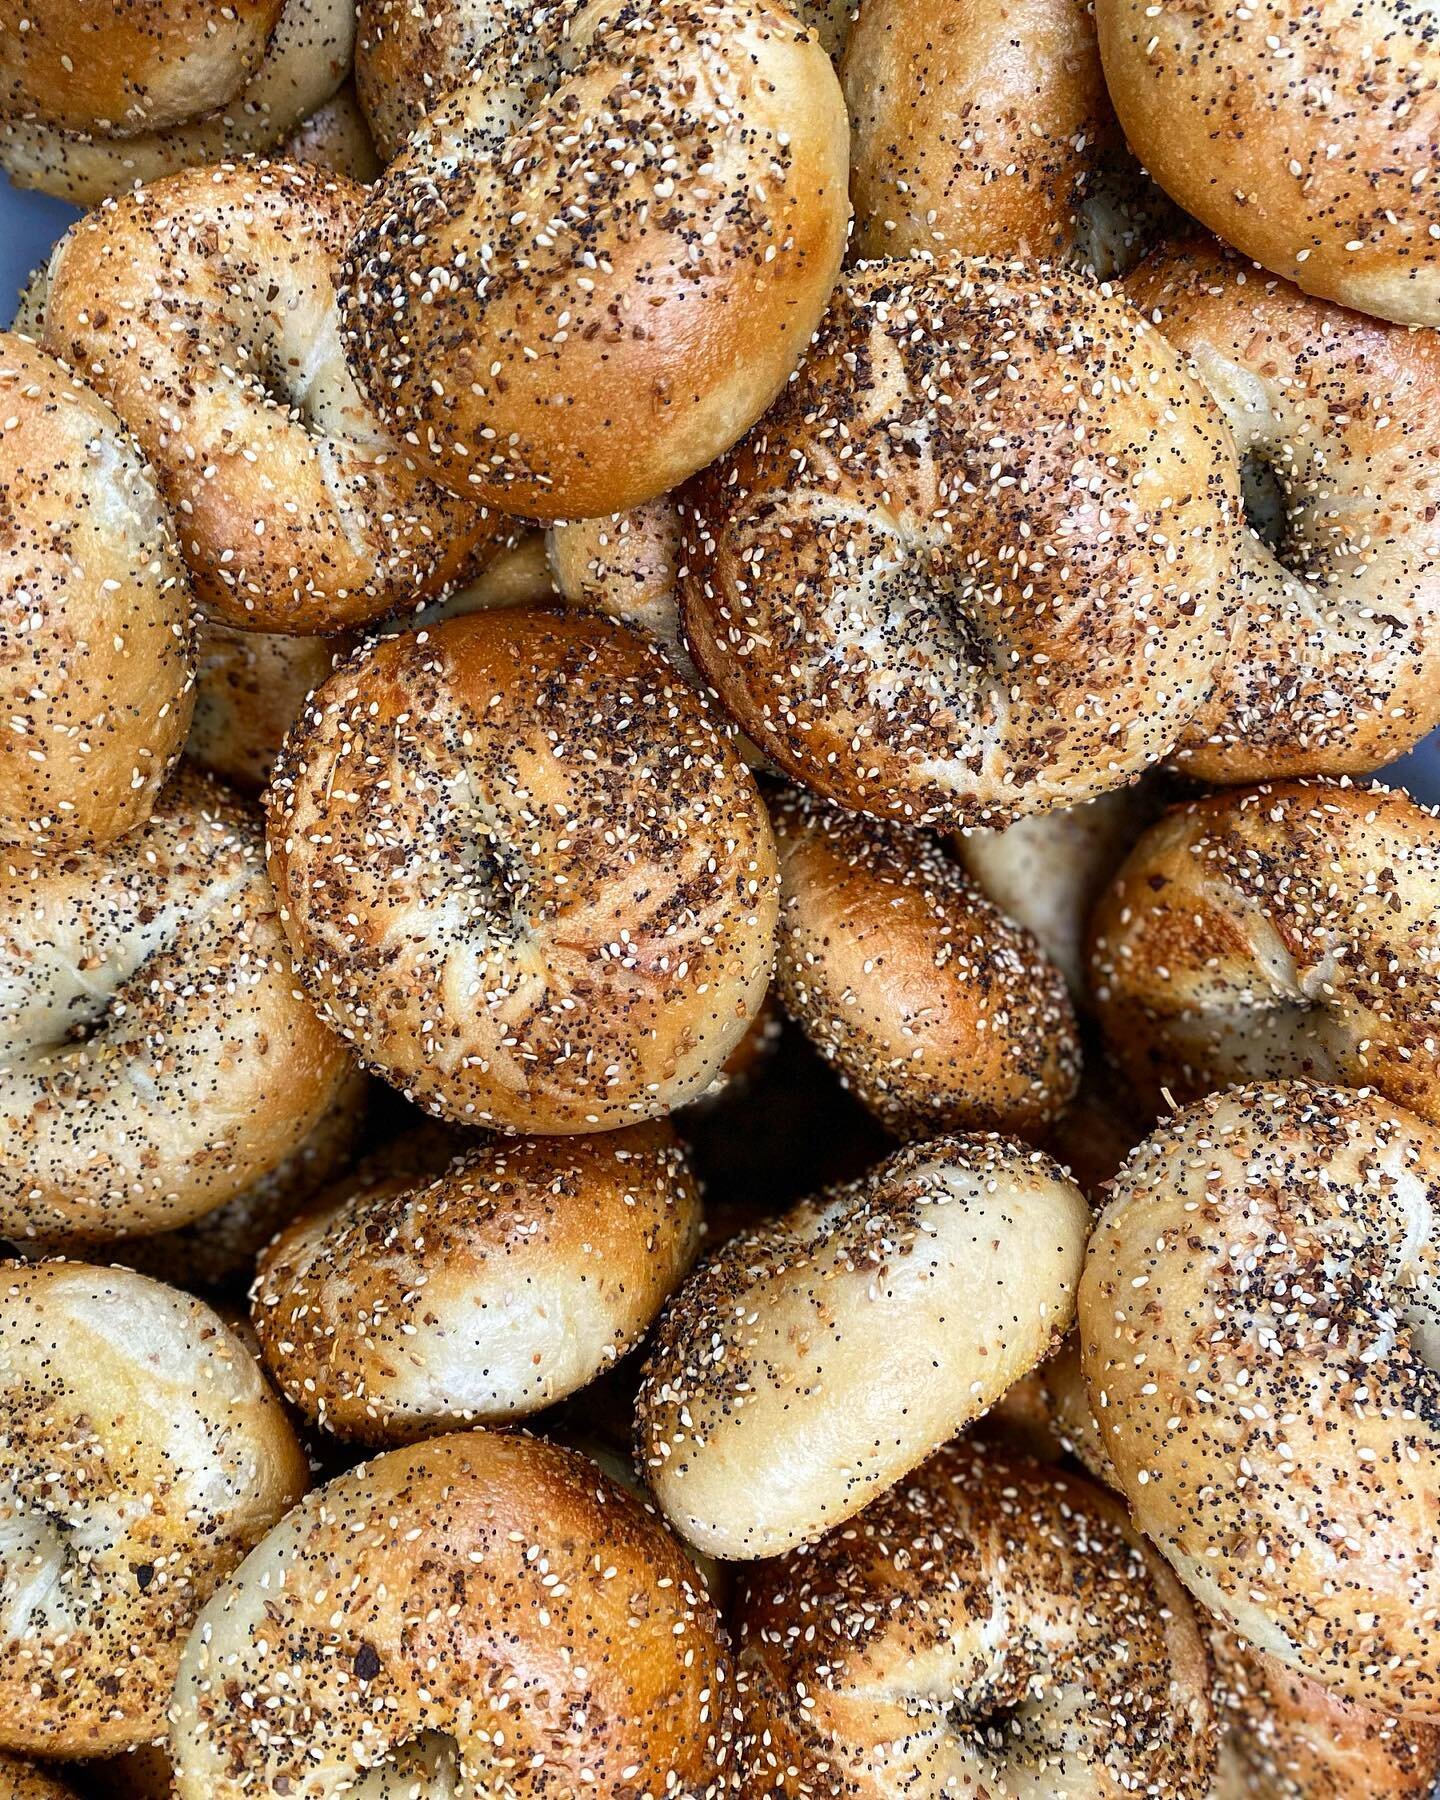 Is there anything better than the smell of fresh Everything bagels right out of the oven? Tell us your favorite bagel in the comments!

#bagels #njbagels #nybagels #bagelsandwich #breakfast #bread #breadbaker #foodporn #harveyshandrolled #walnutstkit